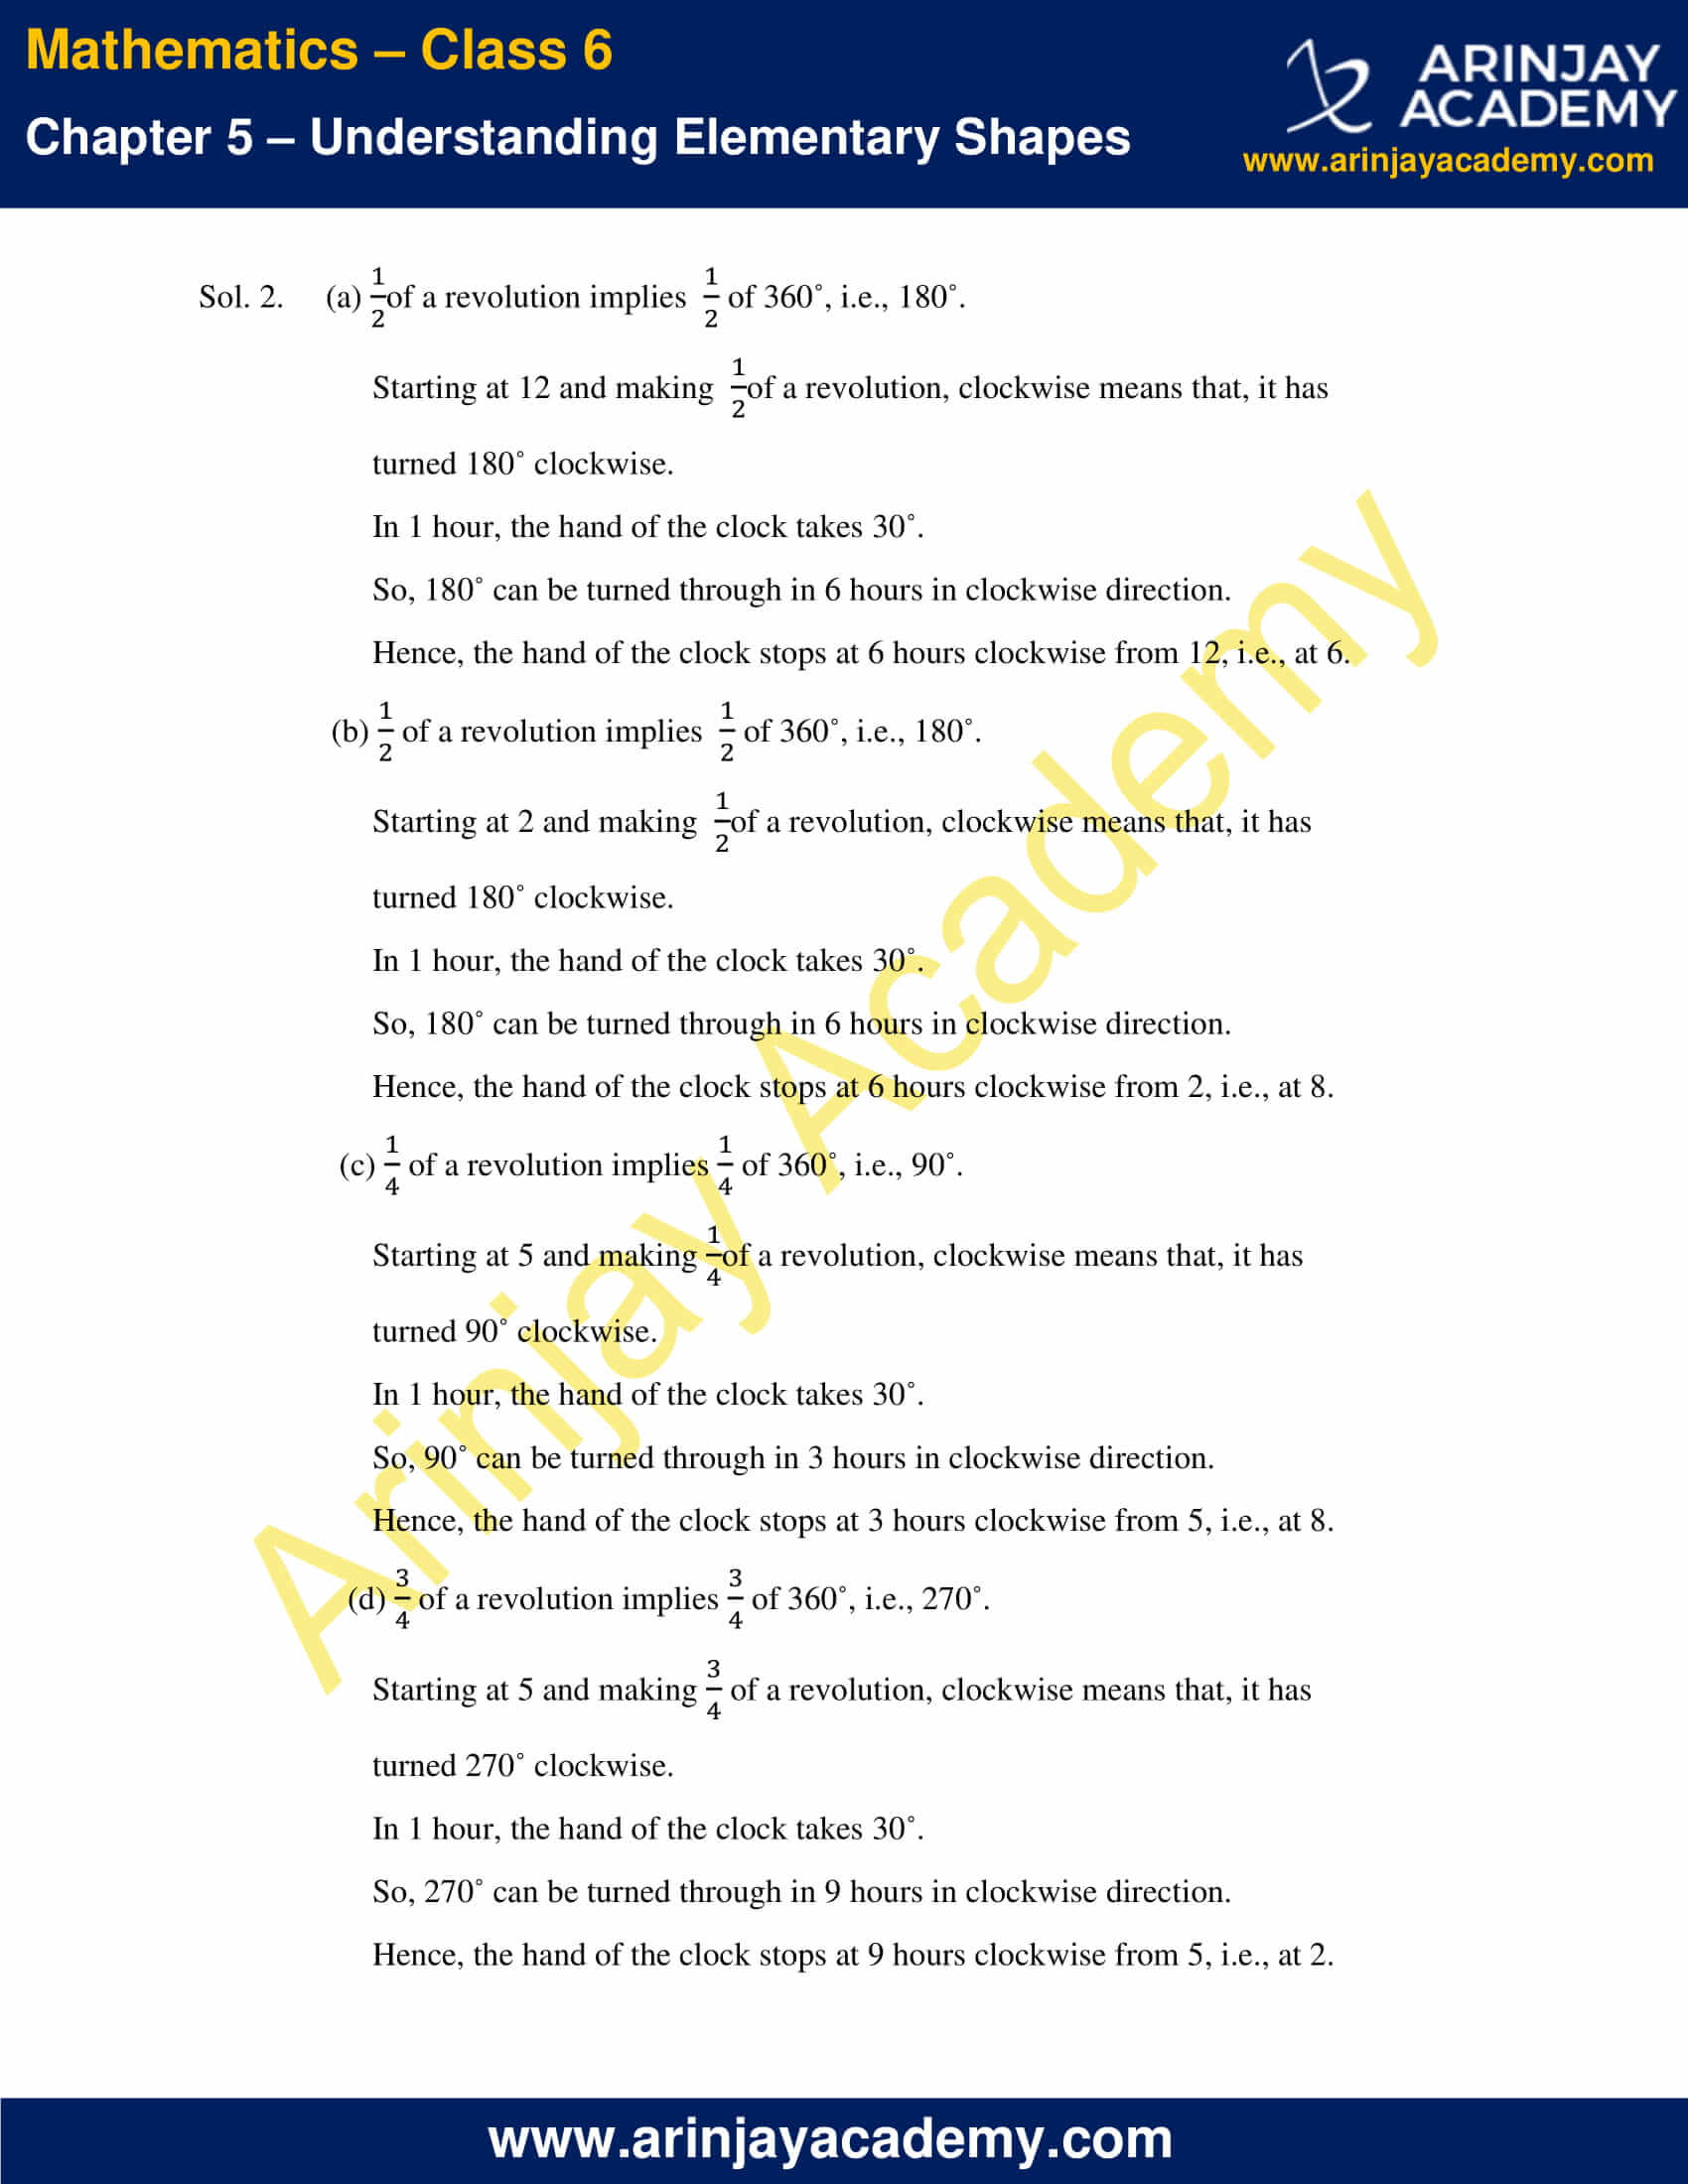 NCERT Solutions for Class 6 Maths Chapter 5 Exercise 5.2 image 3